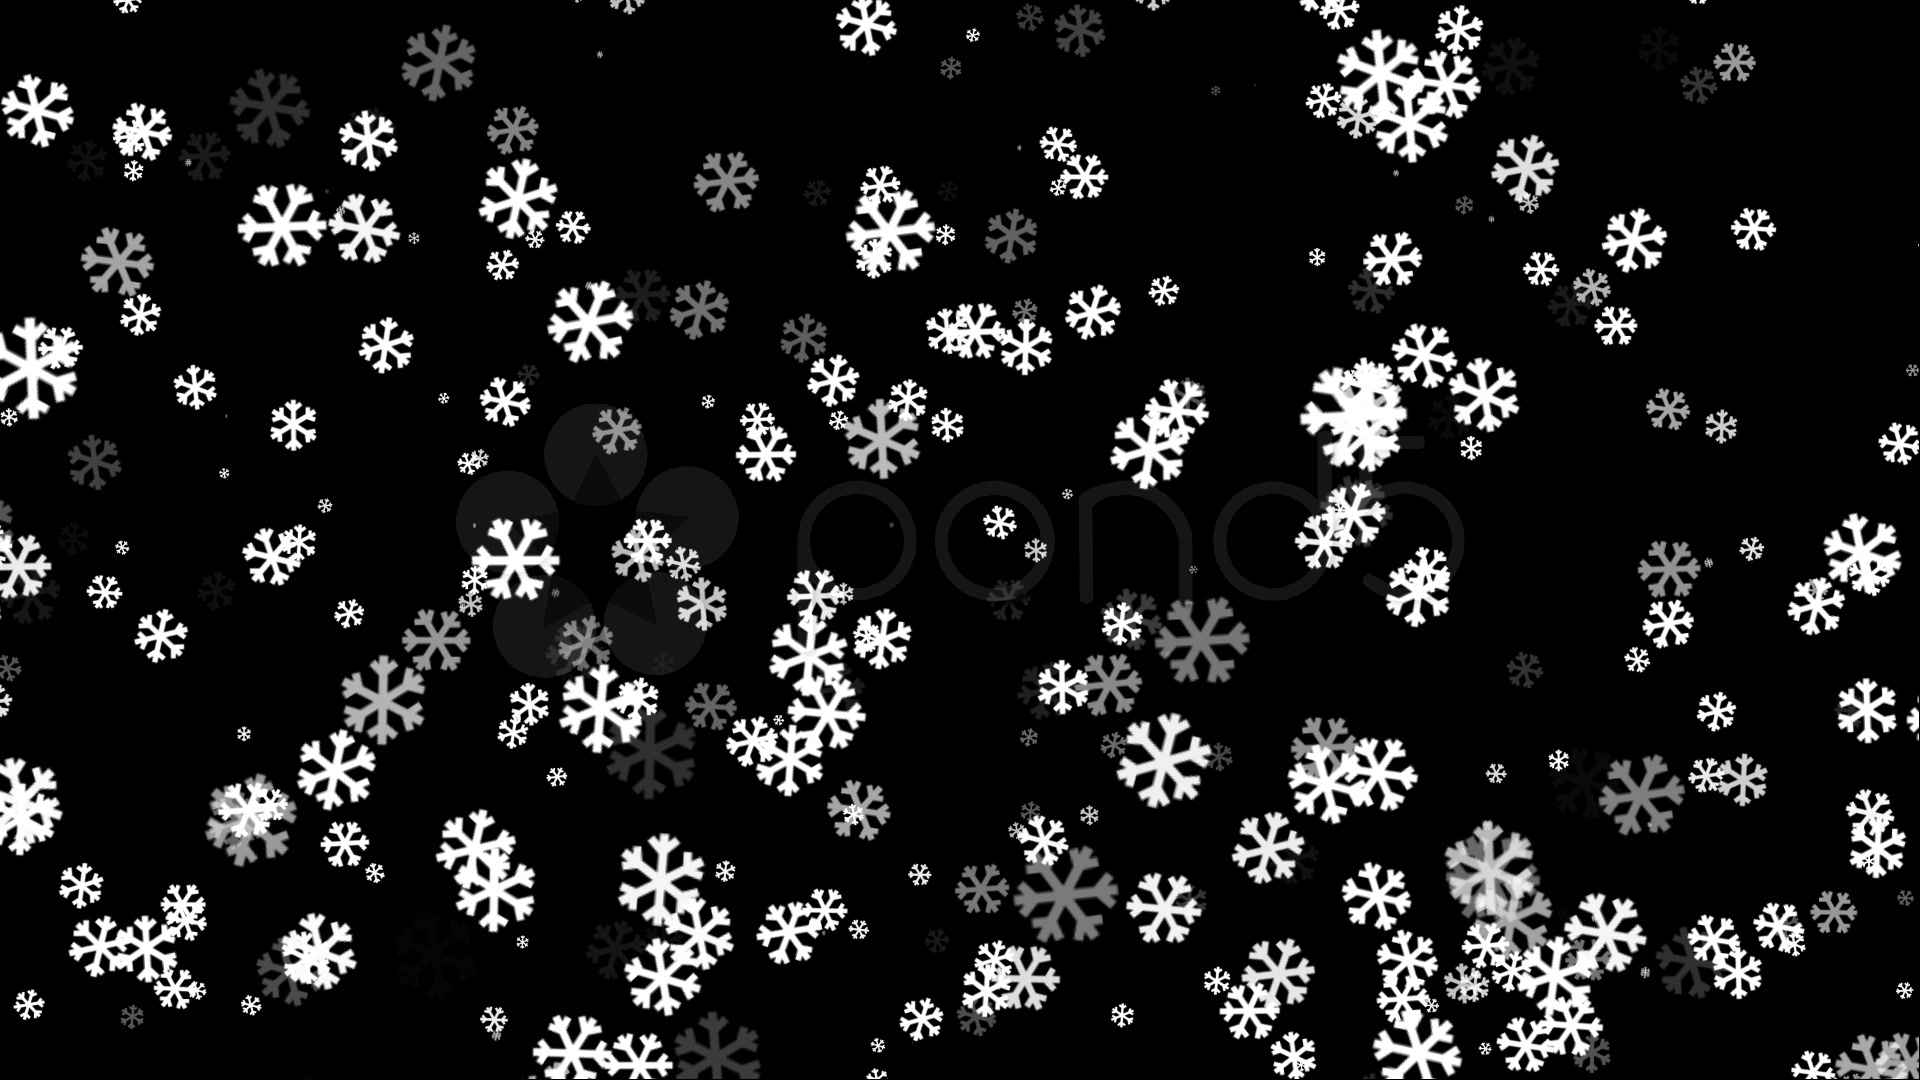 animated clipart snow falling - photo #49